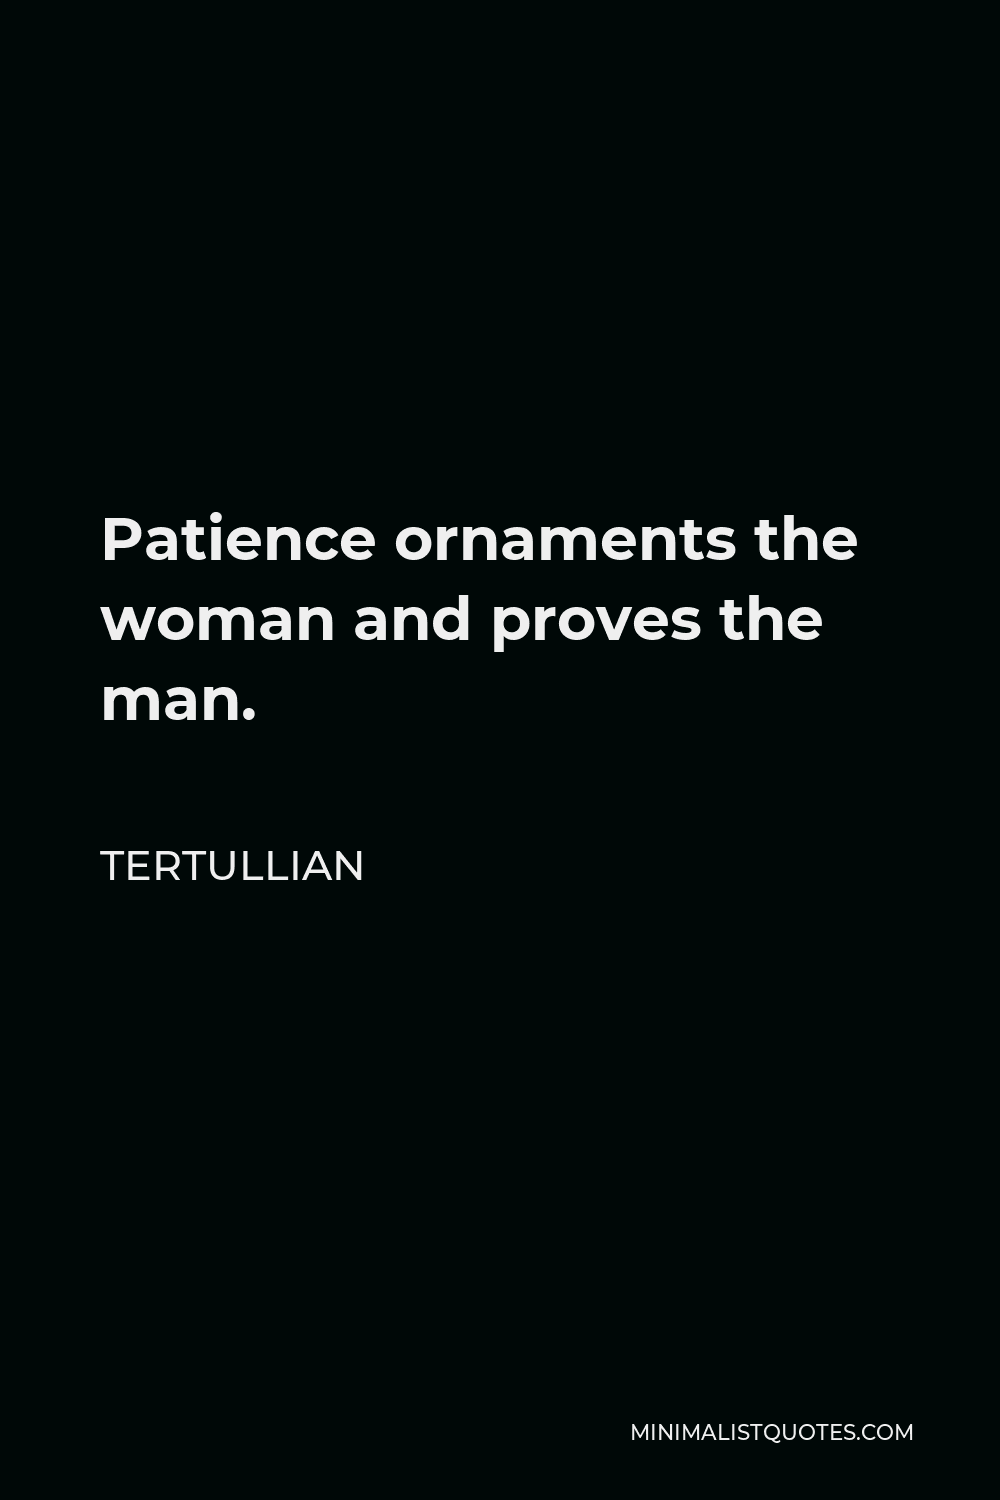 Tertullian Quote - Patience ornaments the woman and proves the man.